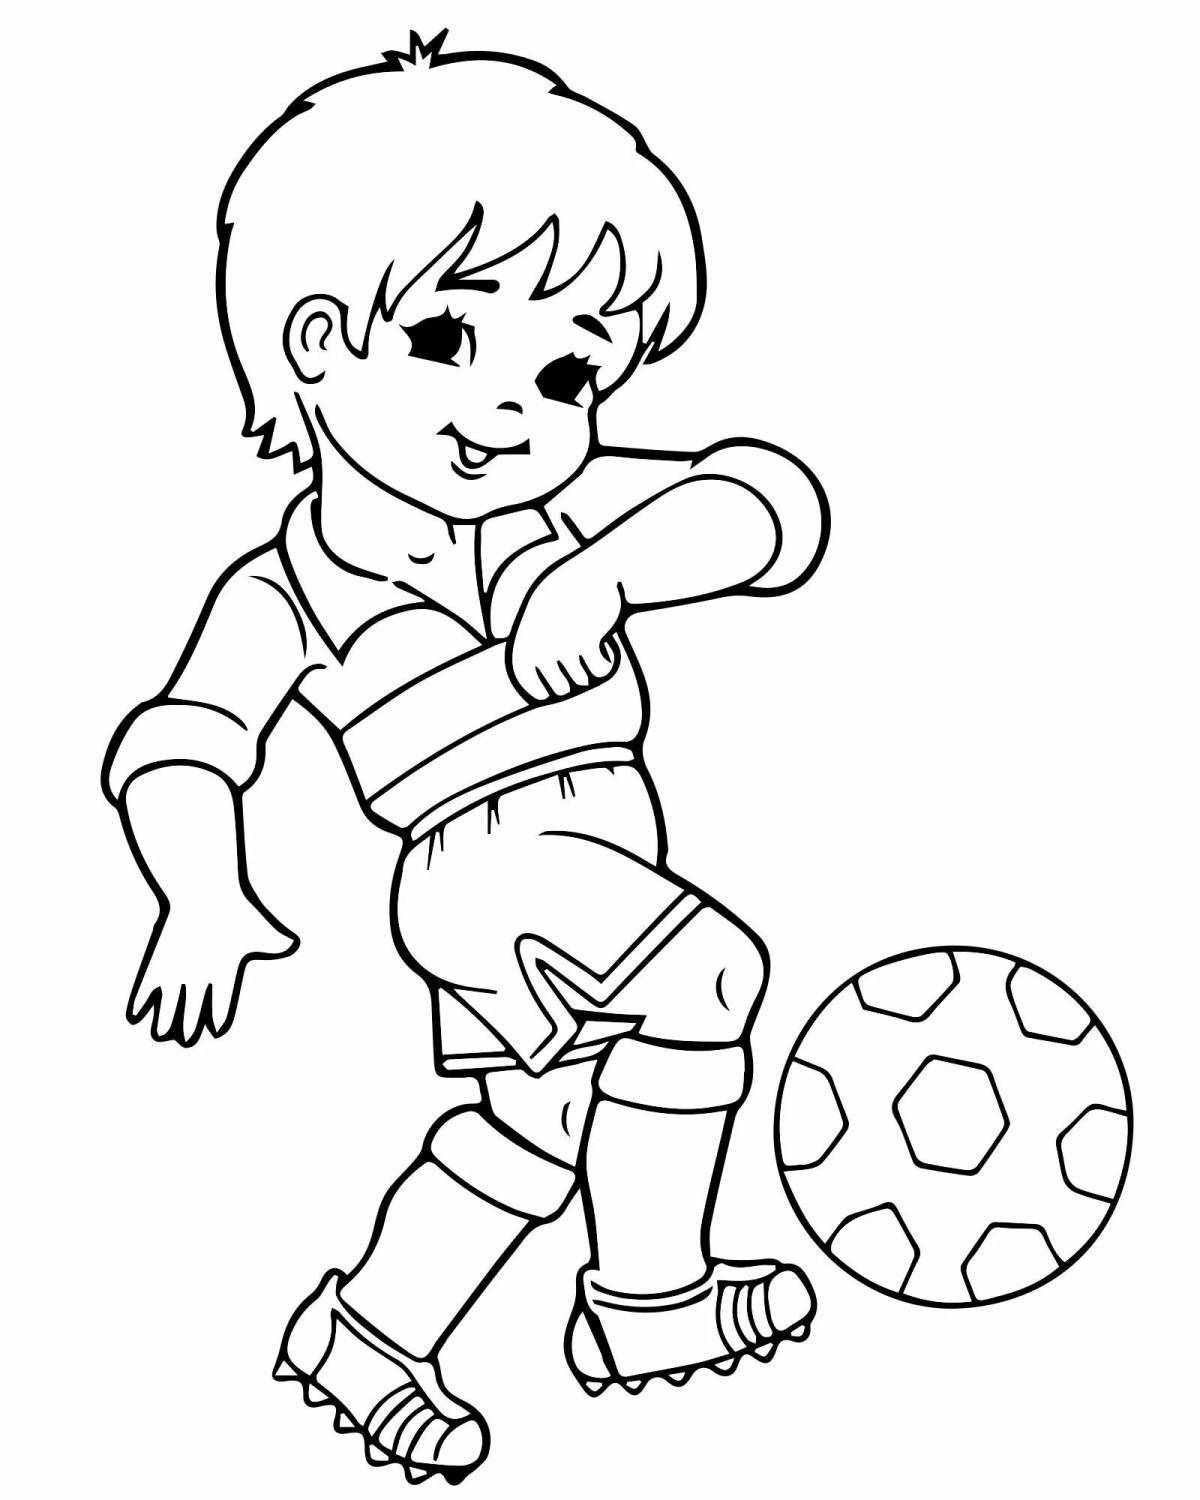 Bright sports coloring book for preschoolers